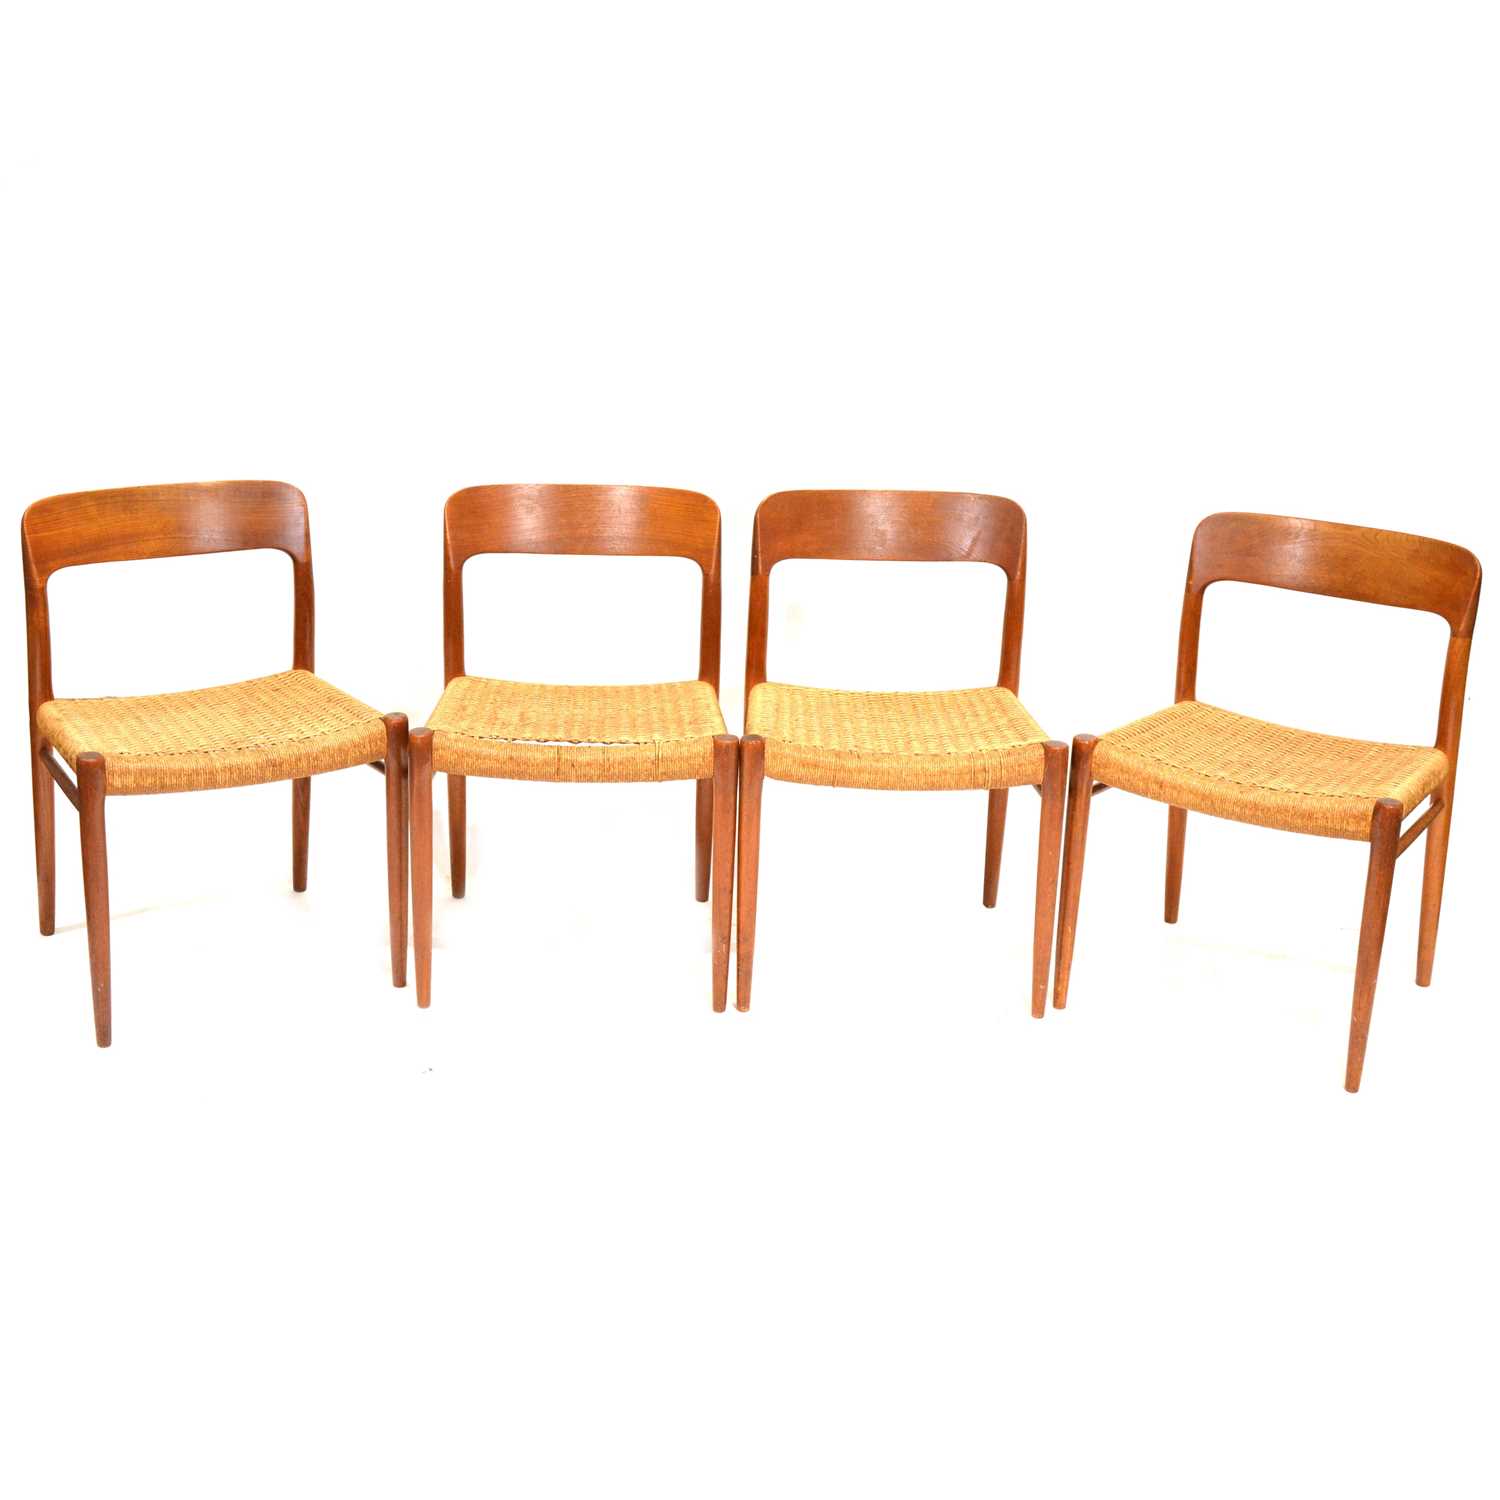 Set of four Mid-Century Danish teak dining chairs, by Niels J L Moller